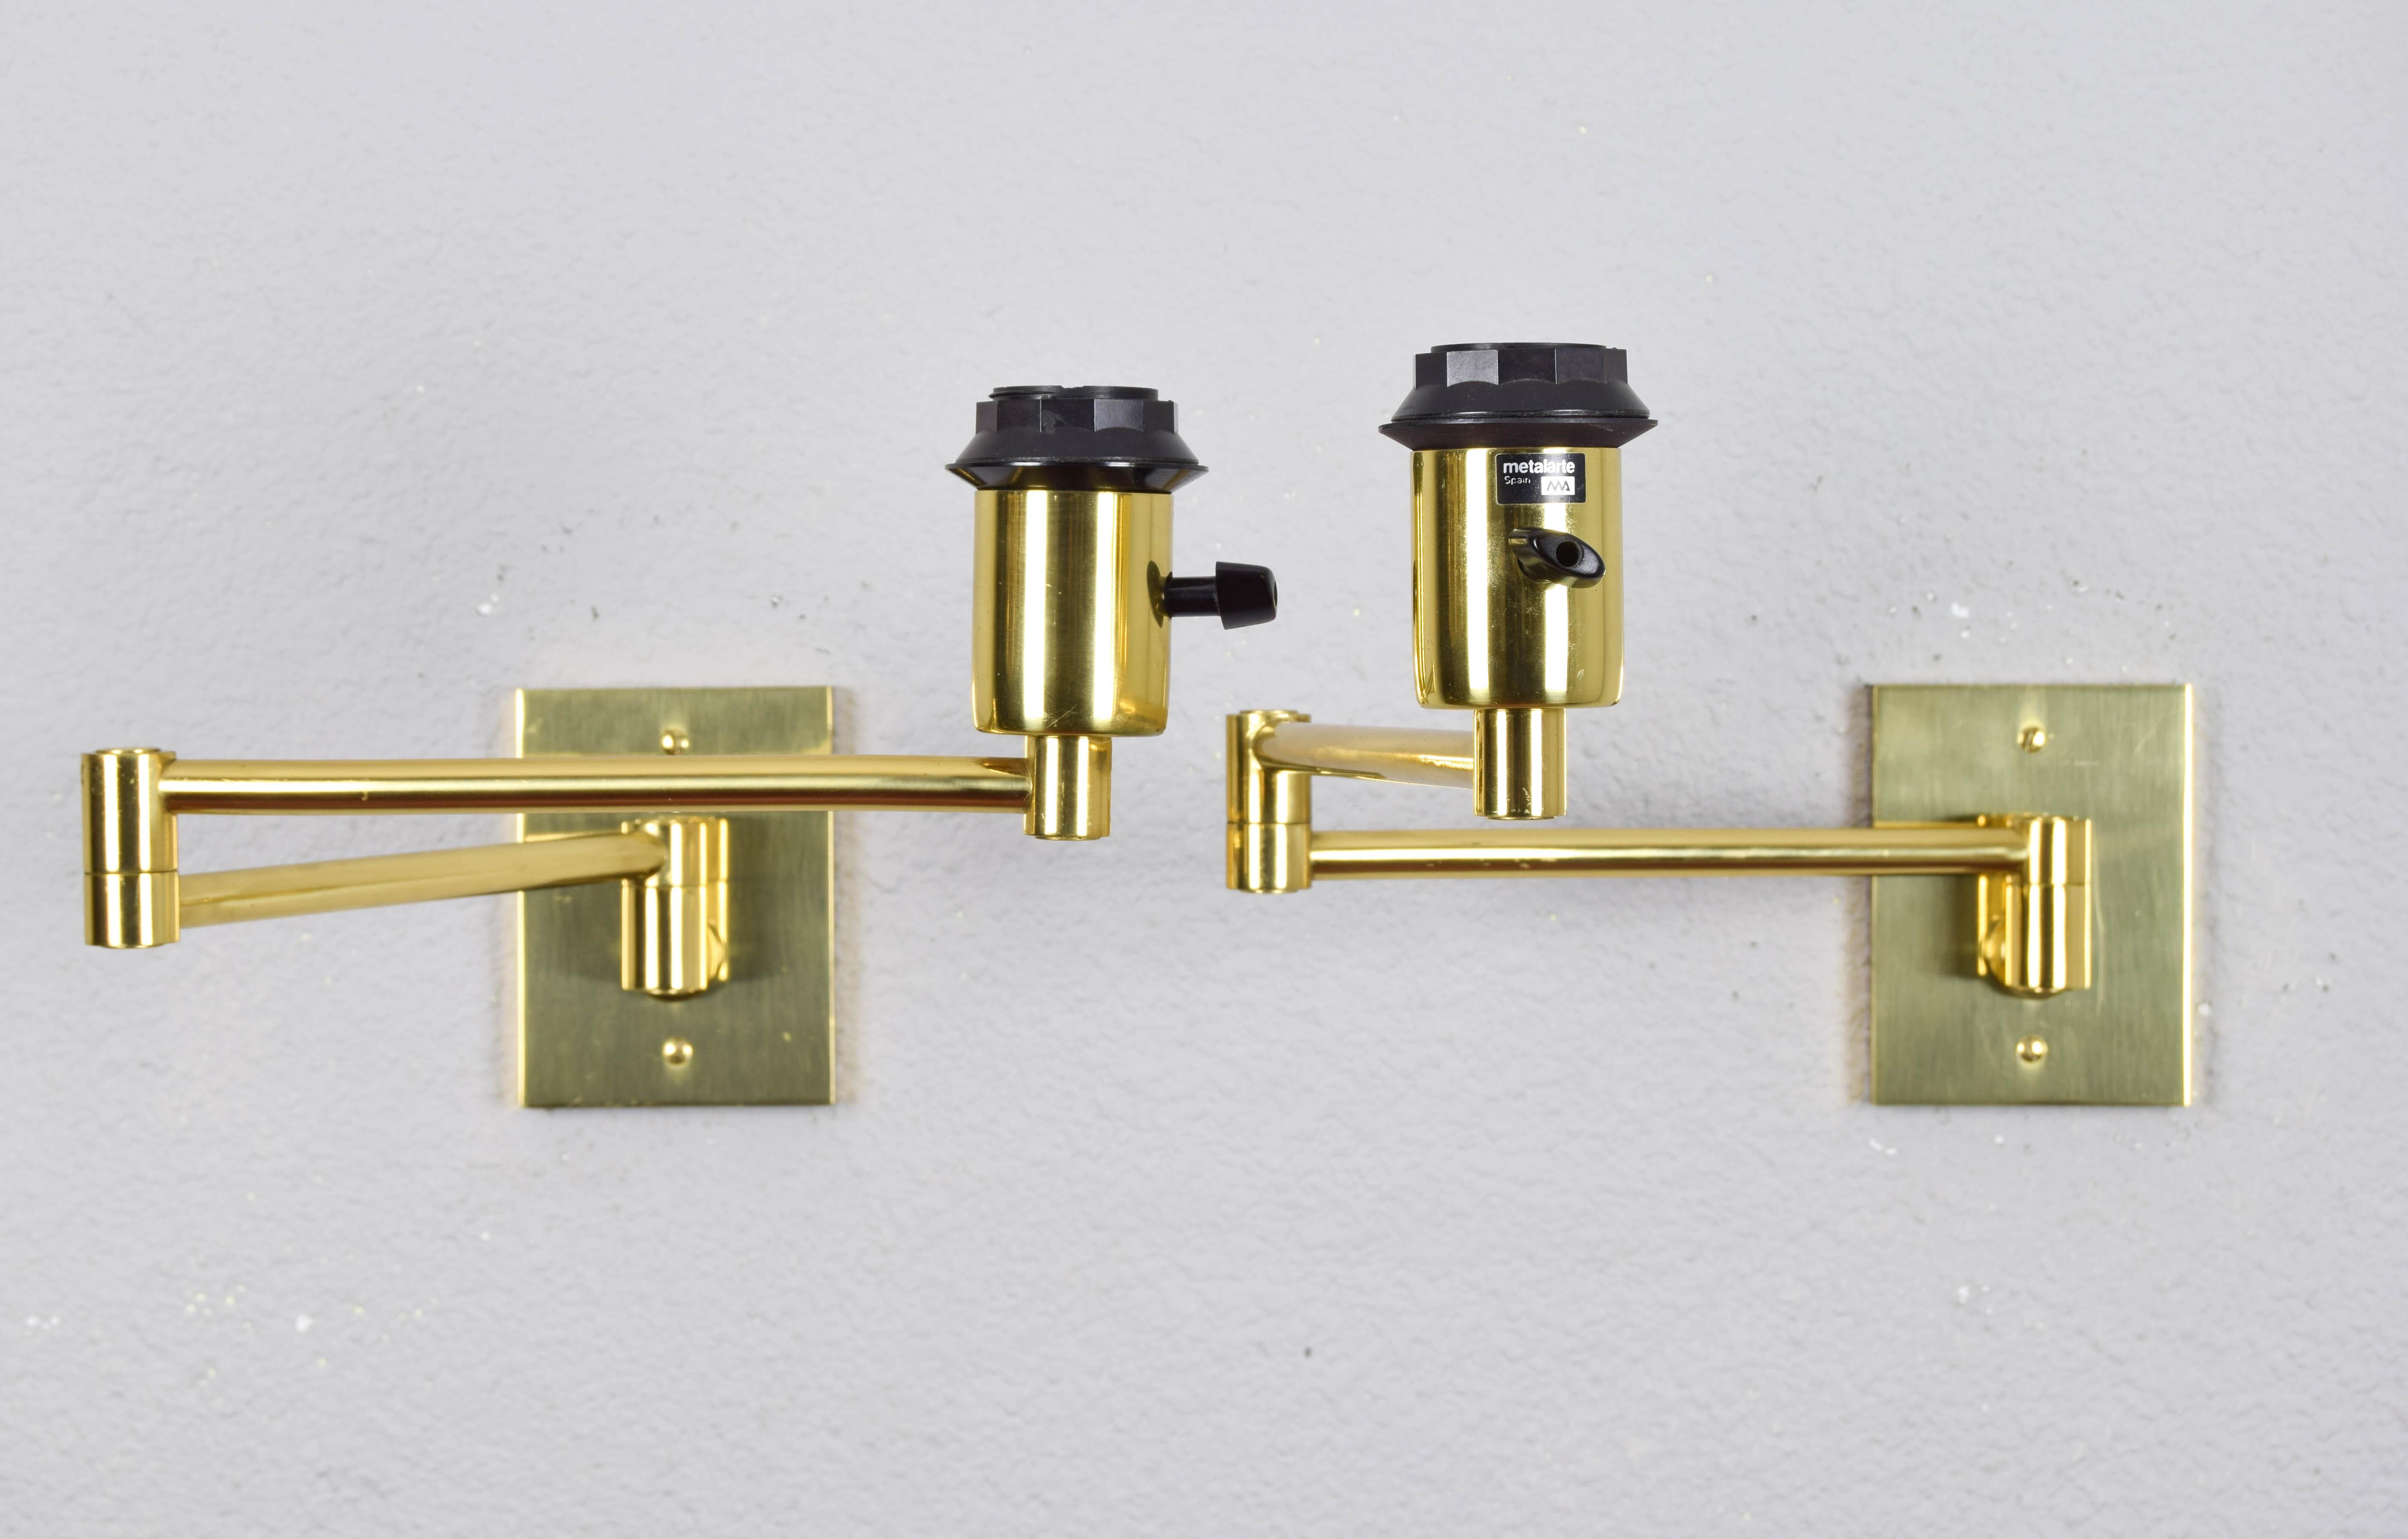 Pair of wall lamps designed by George W. Hansen in the 1960s and produced by the Spanish firm Metalarte with permission from Hansen Lamps New York in the 1970s. Brass structure and articulated arm.
Structures in proper operation. Brass in good